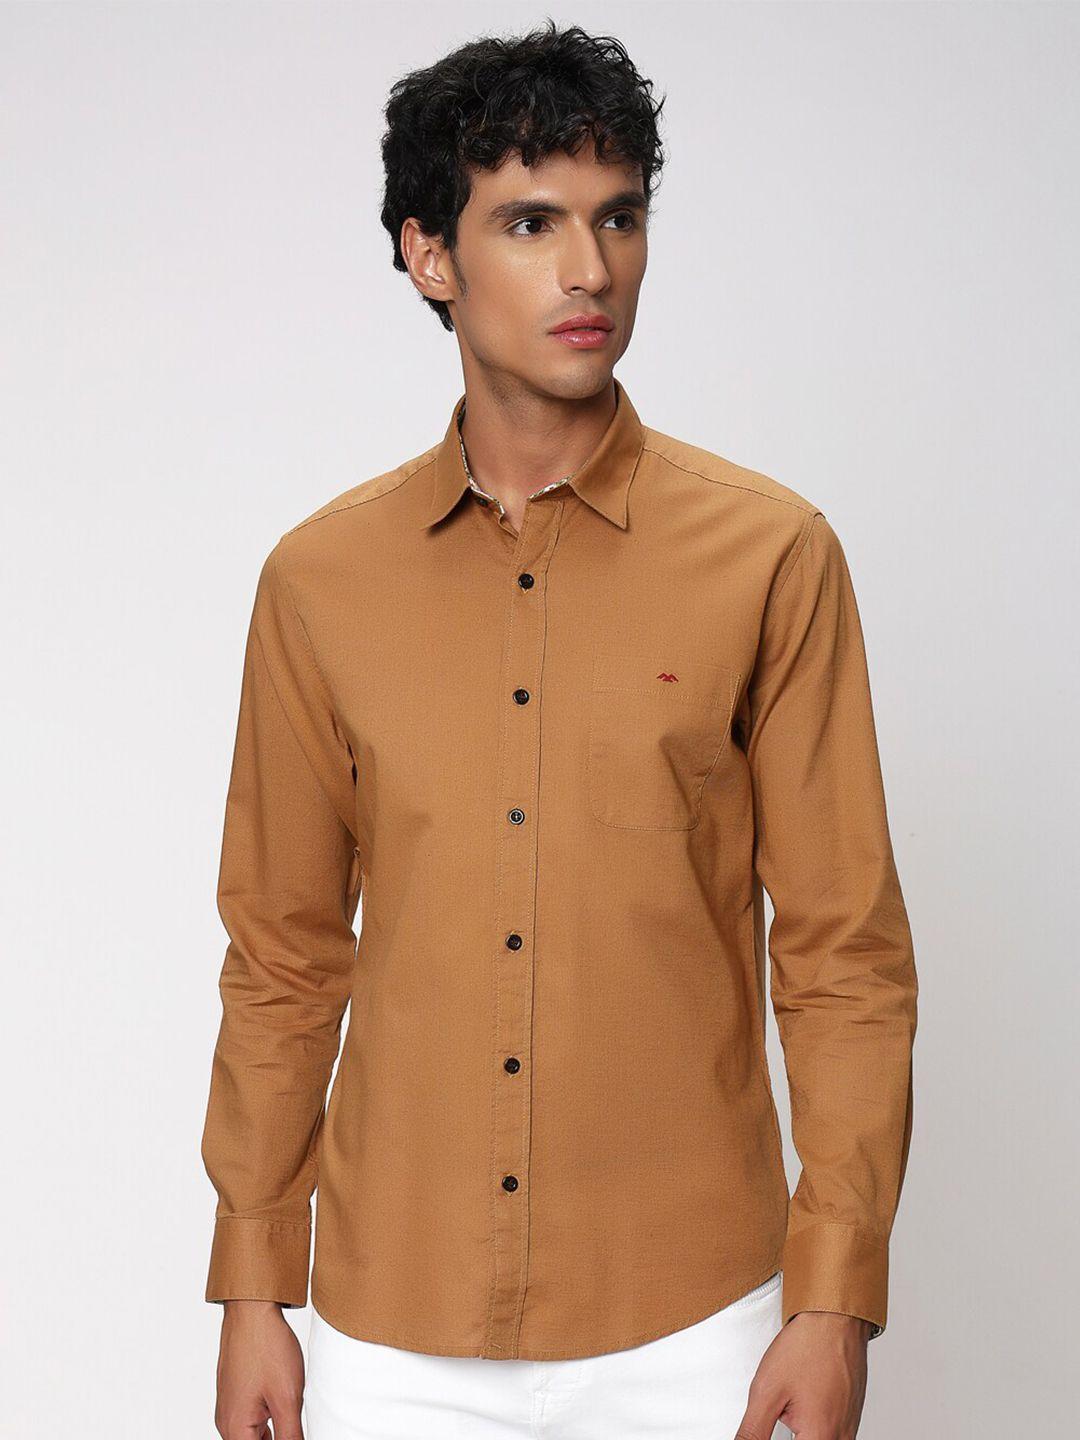 mufti-classic-slim-fit-cotton-linen-casual-shirt